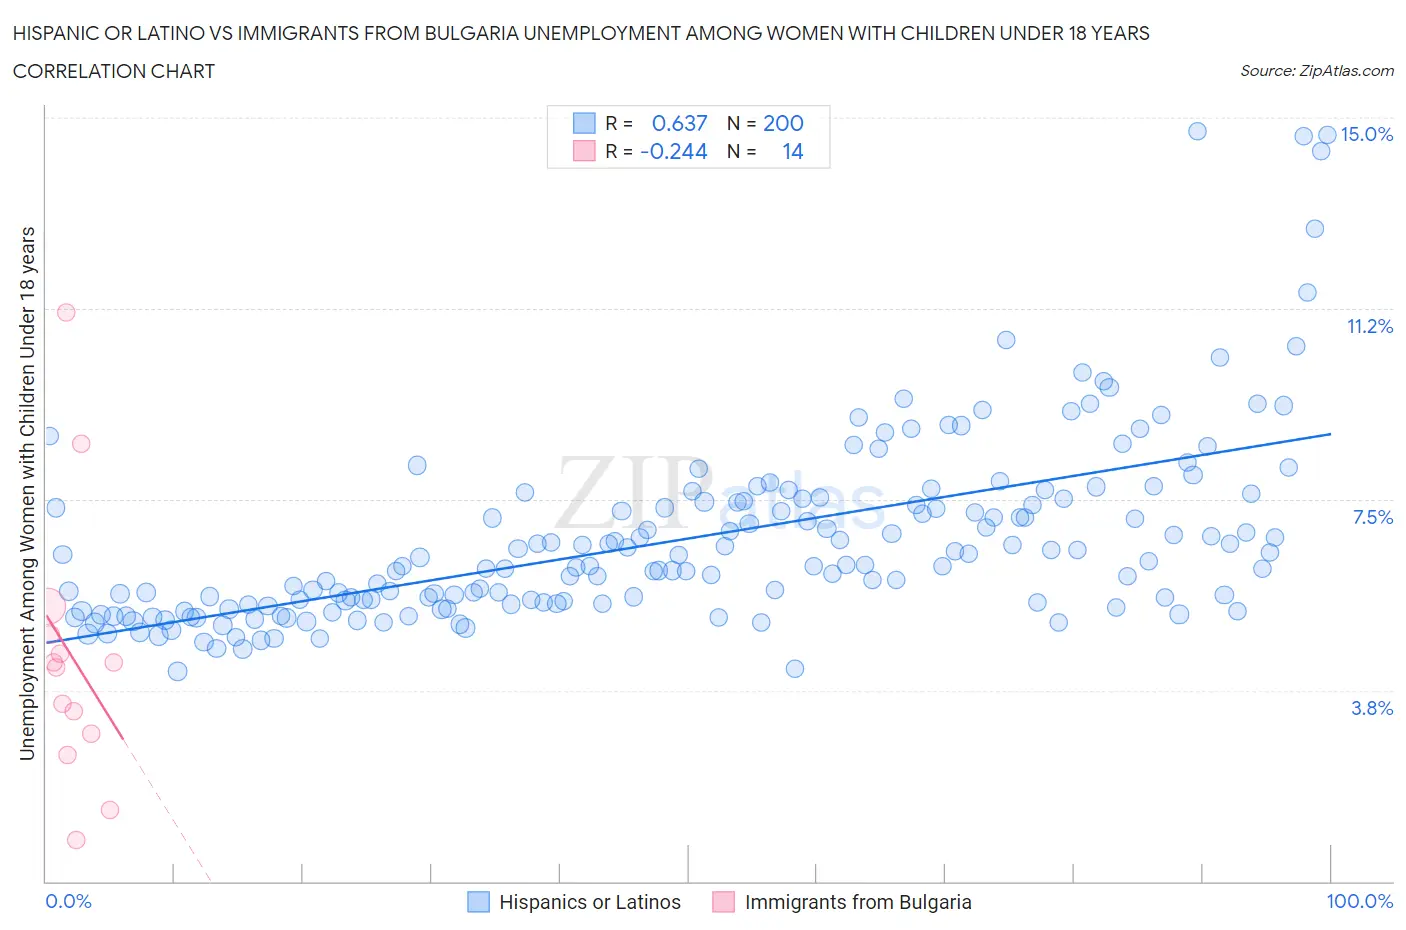 Hispanic or Latino vs Immigrants from Bulgaria Unemployment Among Women with Children Under 18 years